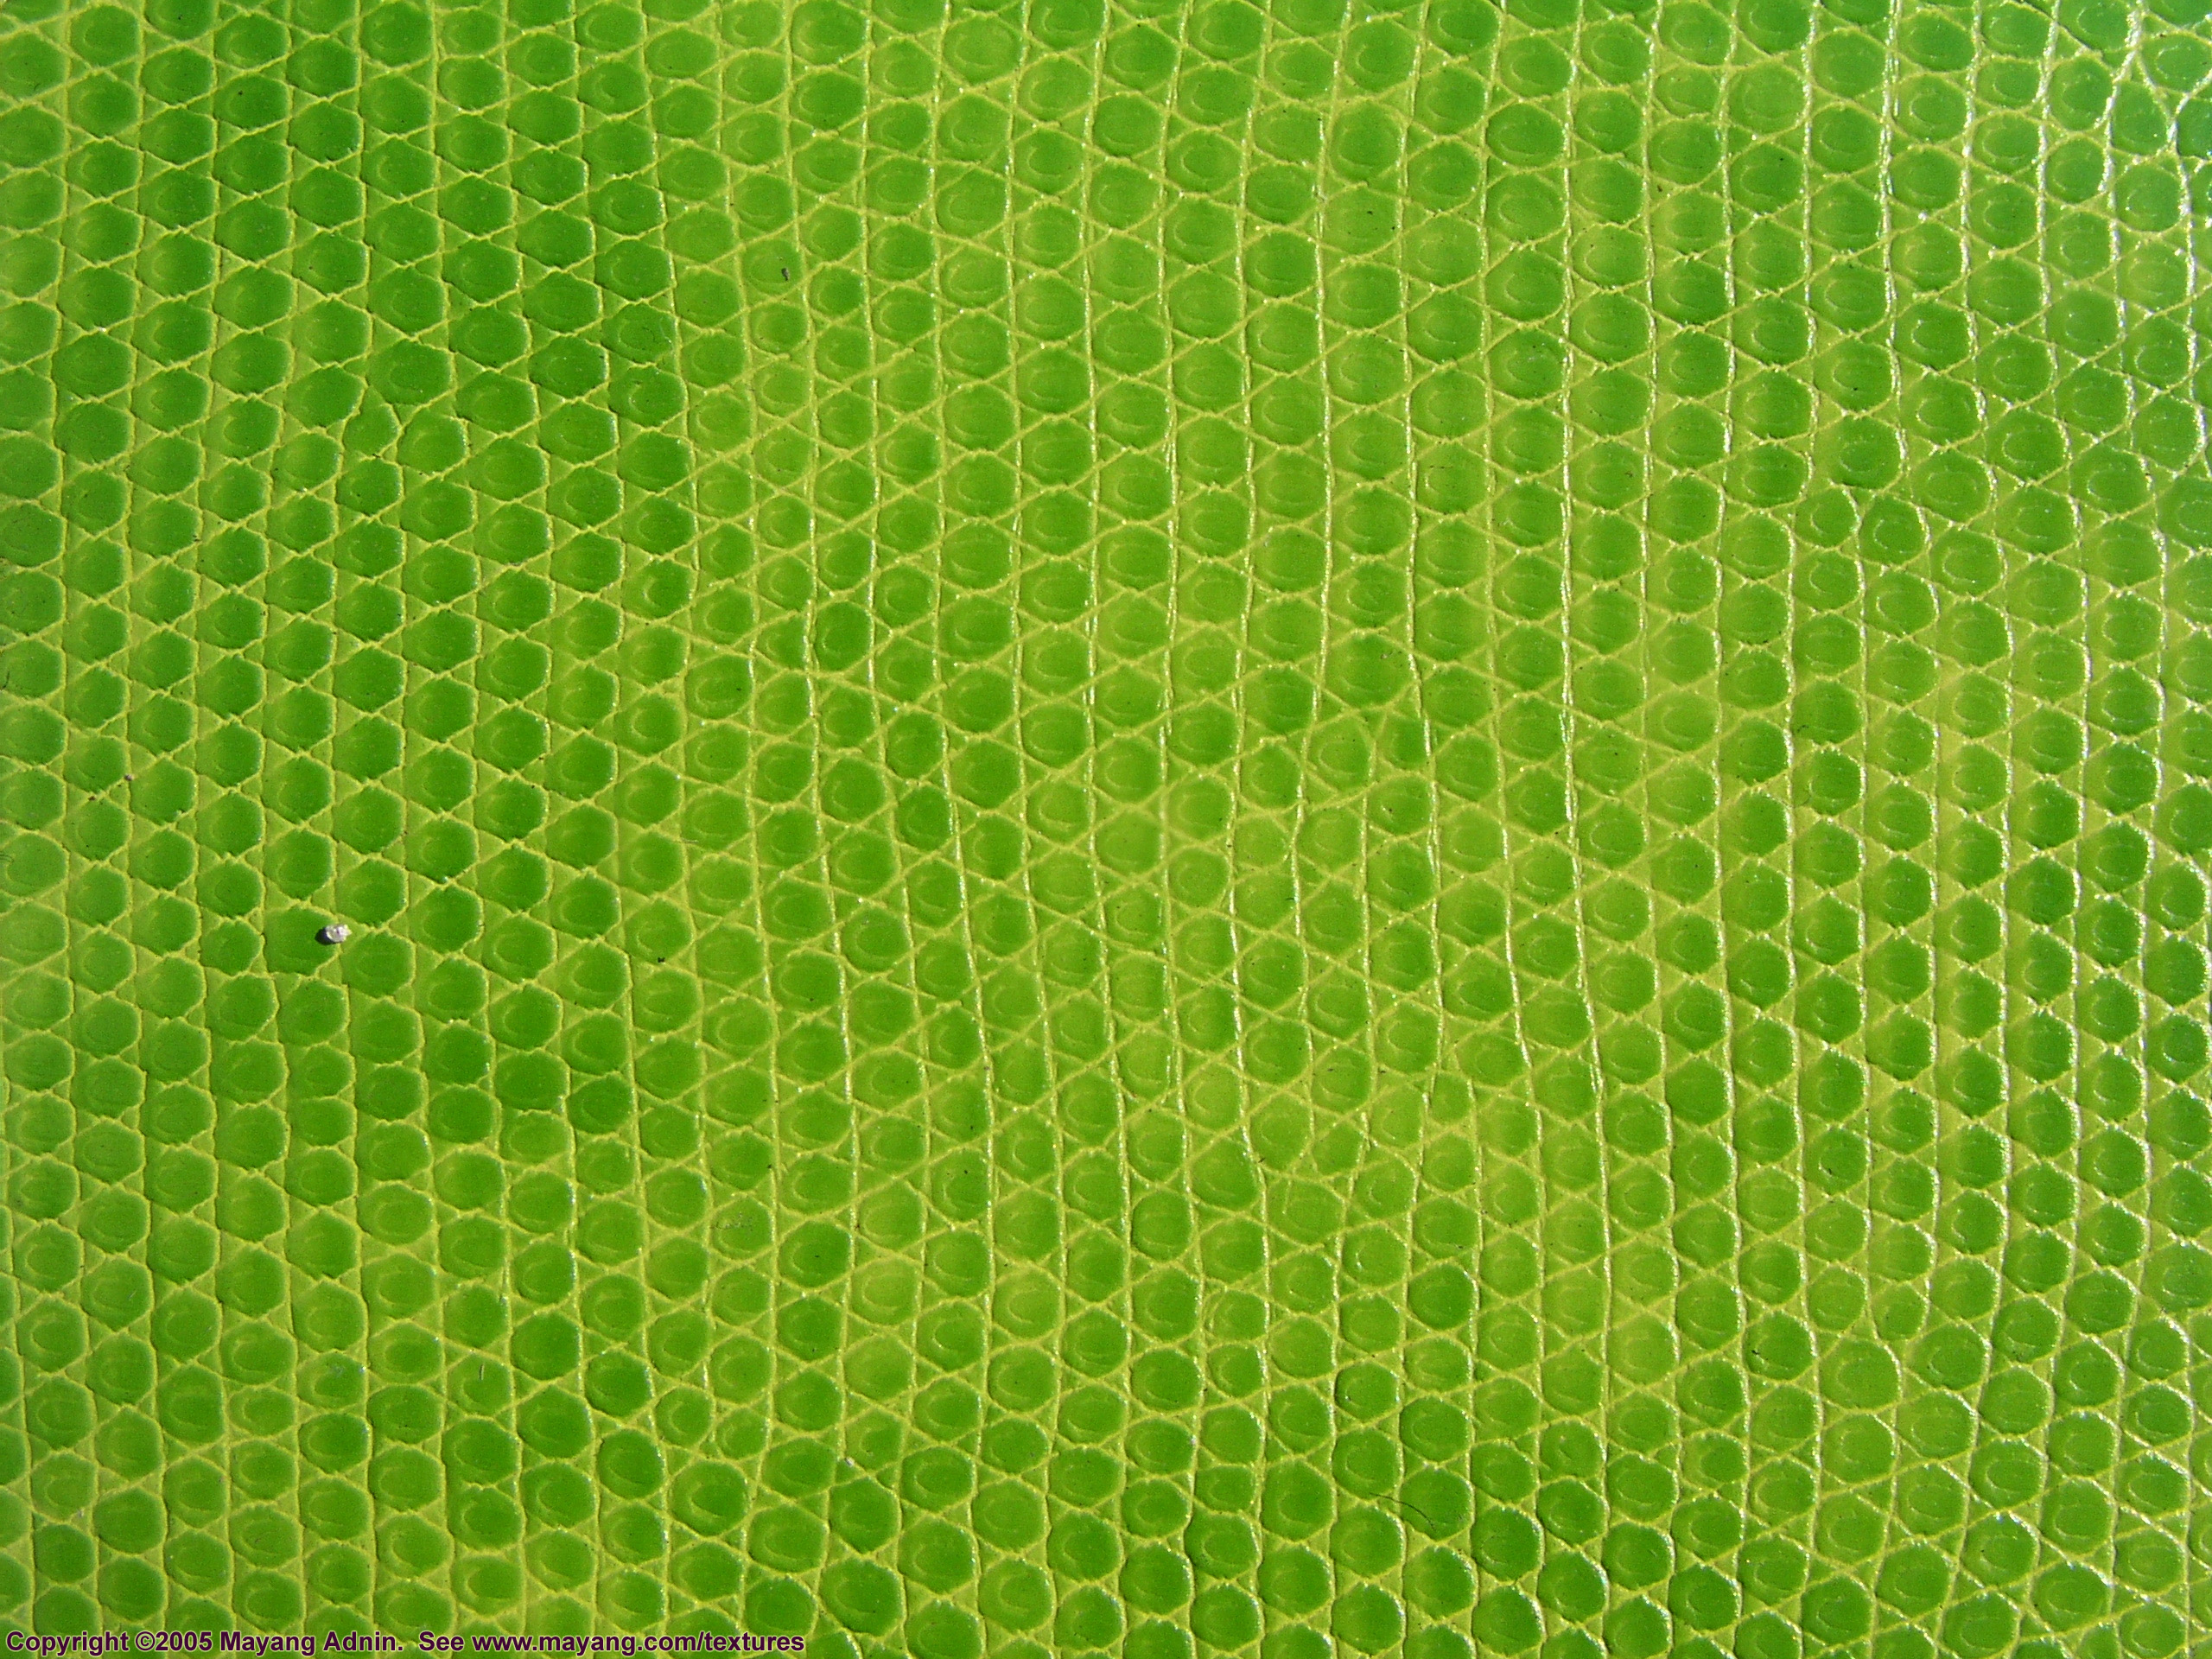 green snake leather texture, background, leather background, leather background